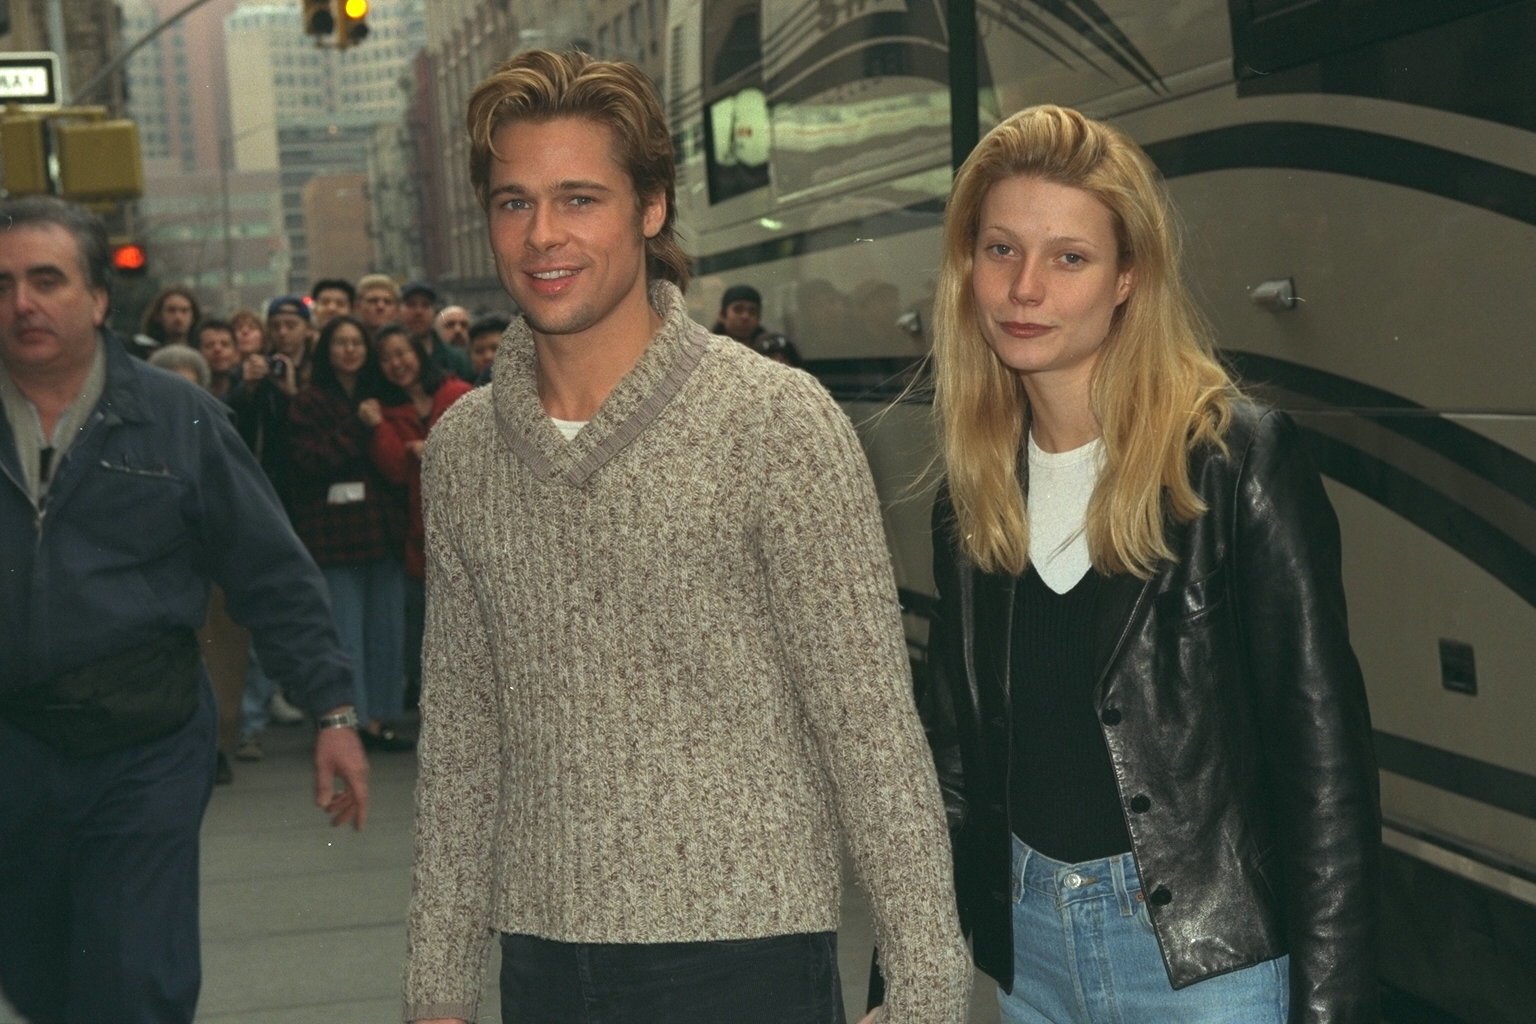 Photo of Brad Pitt and Gwyneth Paltrow in Paris on March 29, 1997 | Source: Getty Images